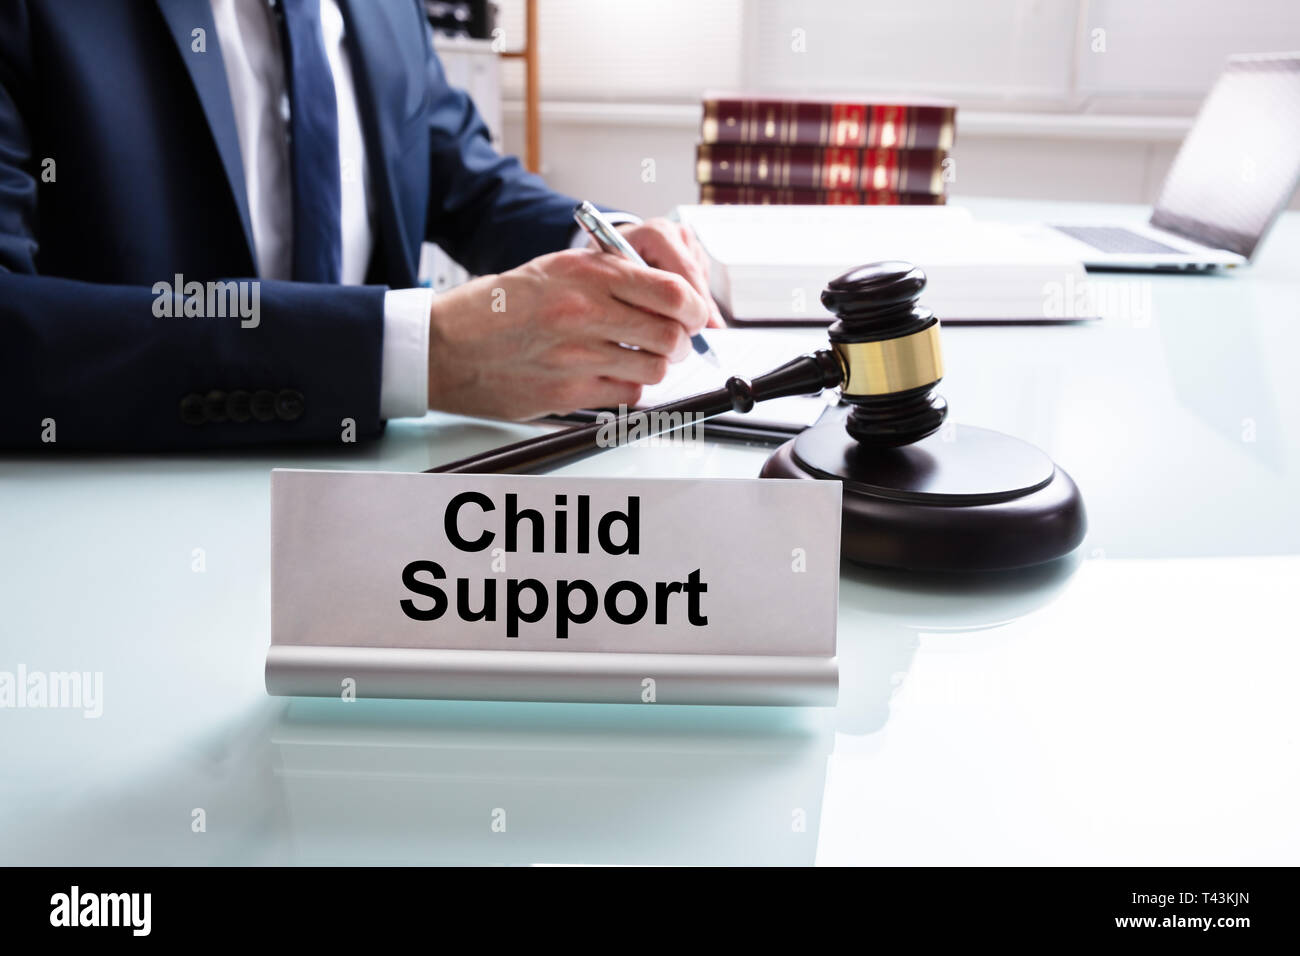 Child Support Nameplate With Judge Writing On Paper Over Desk In Courtroom Stock Photo